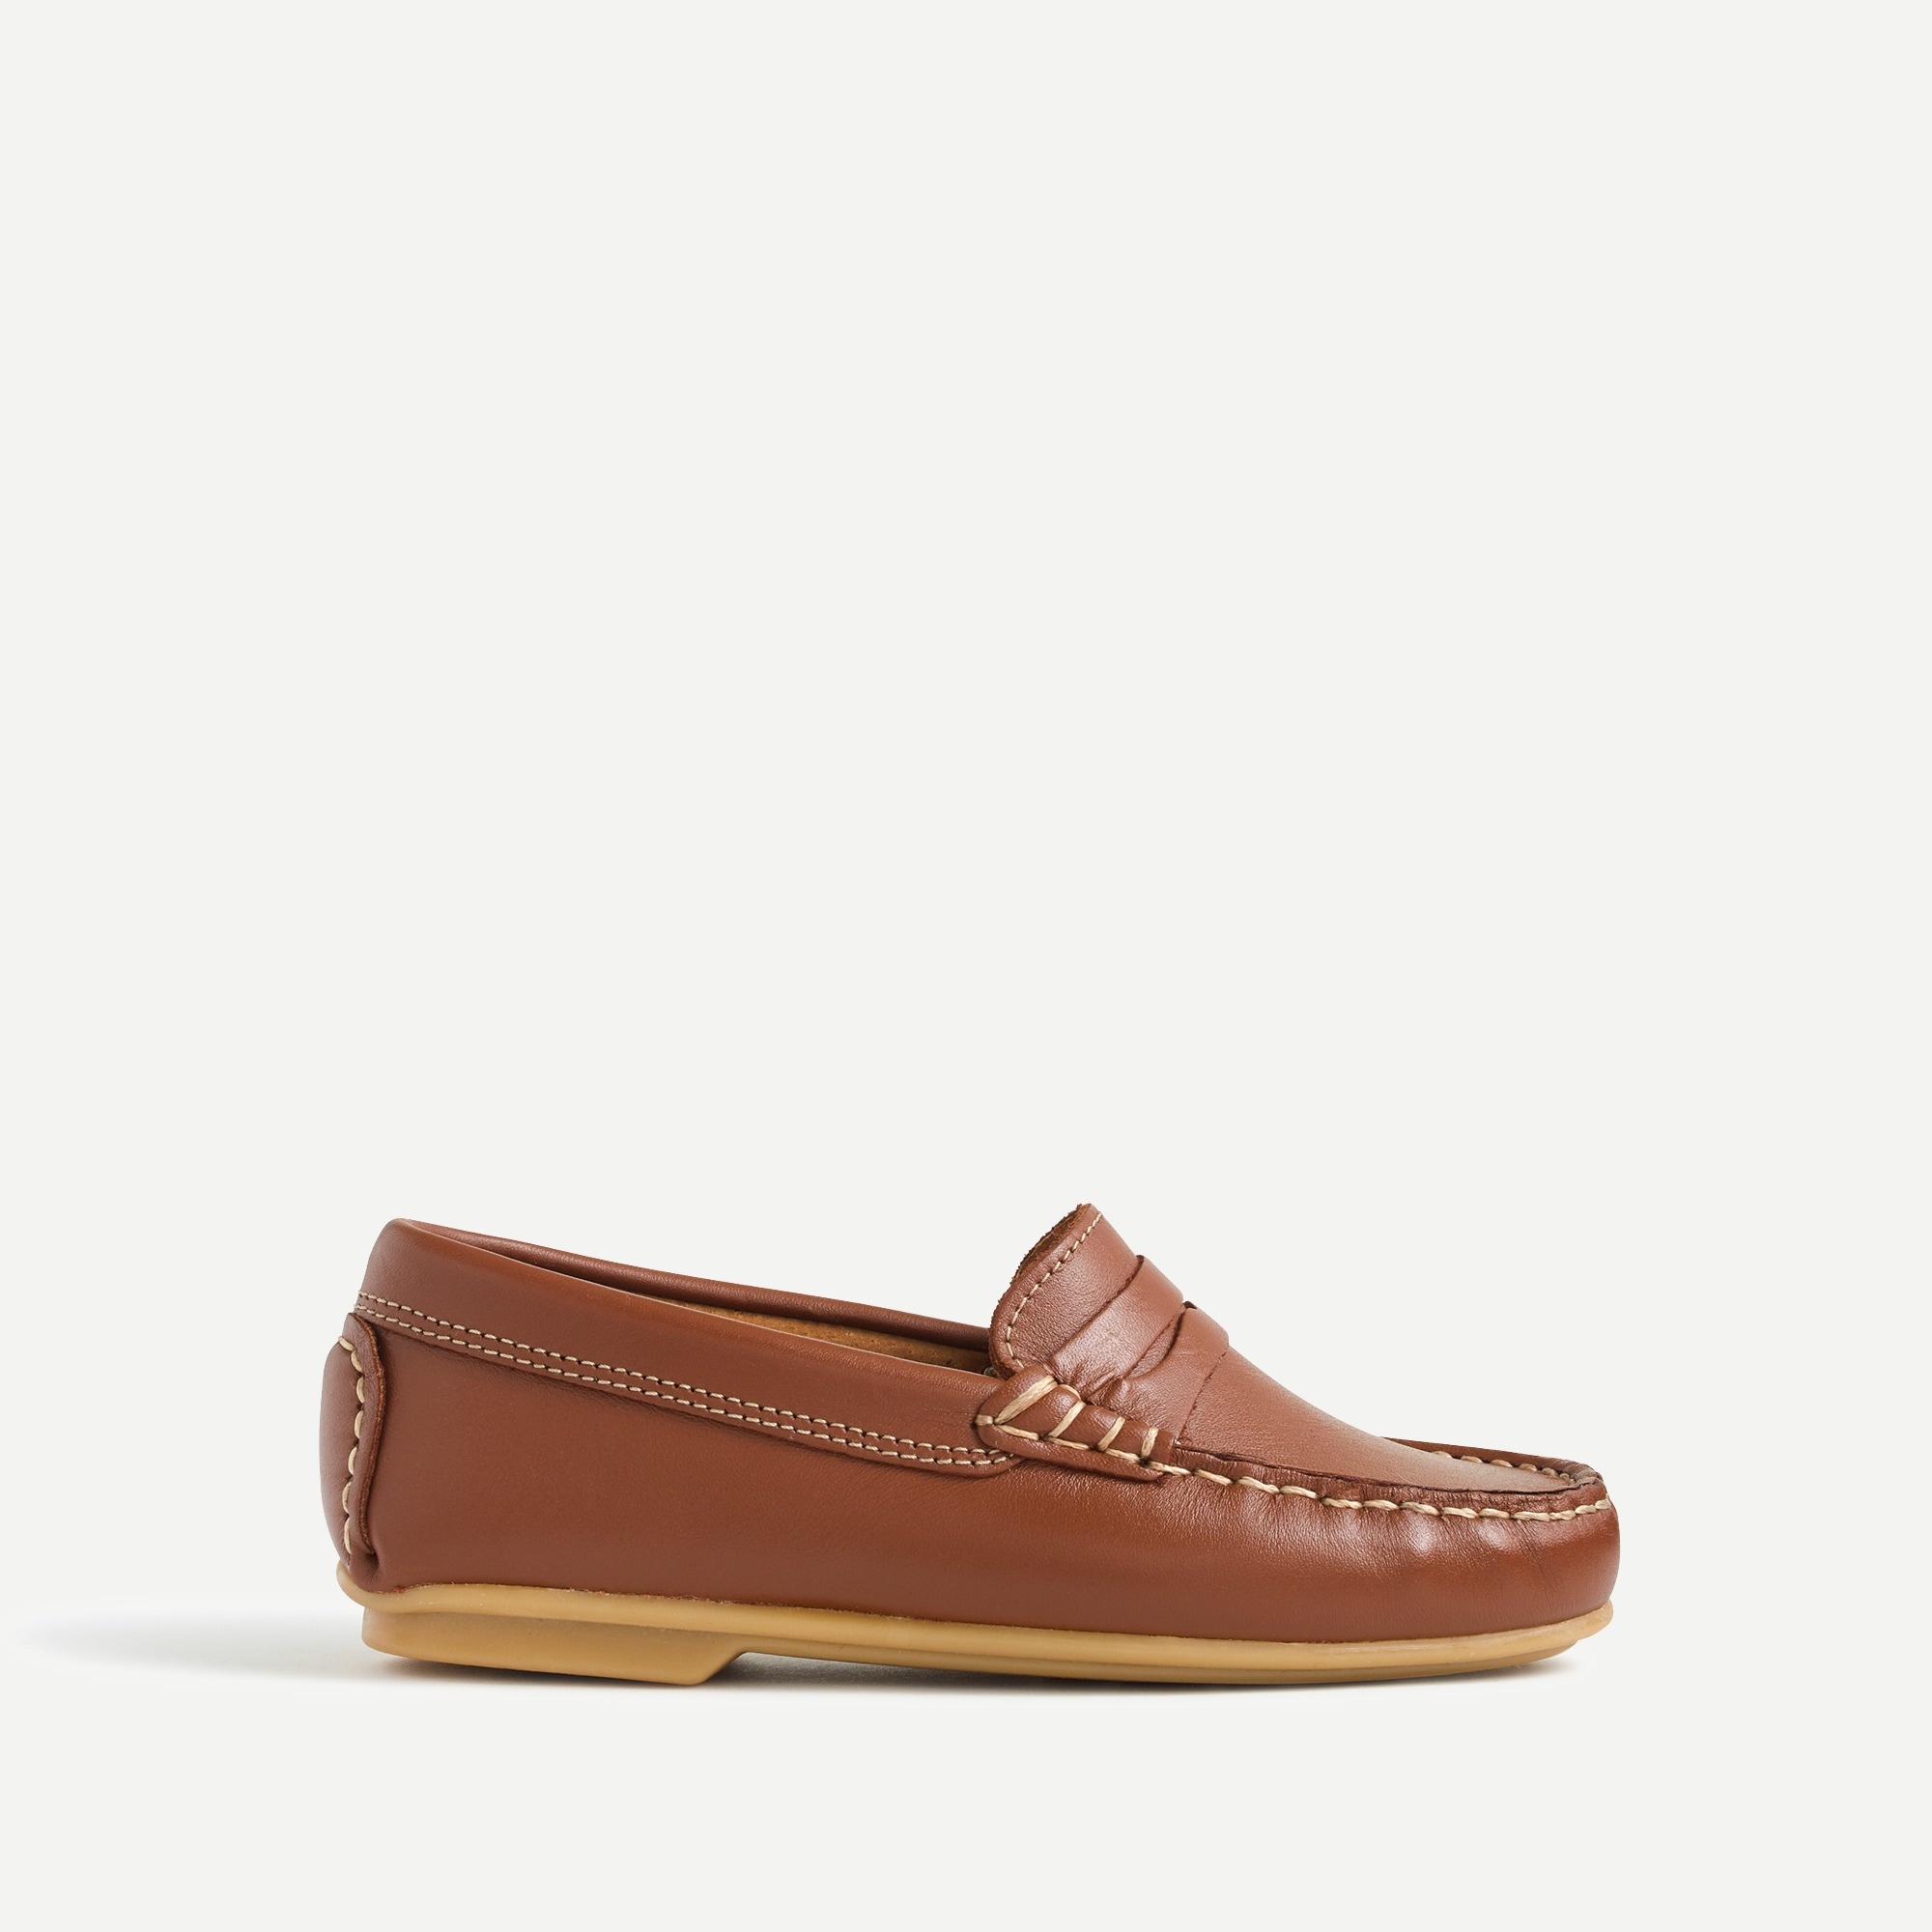 For Crewcuts Driving Moccasins For Boys